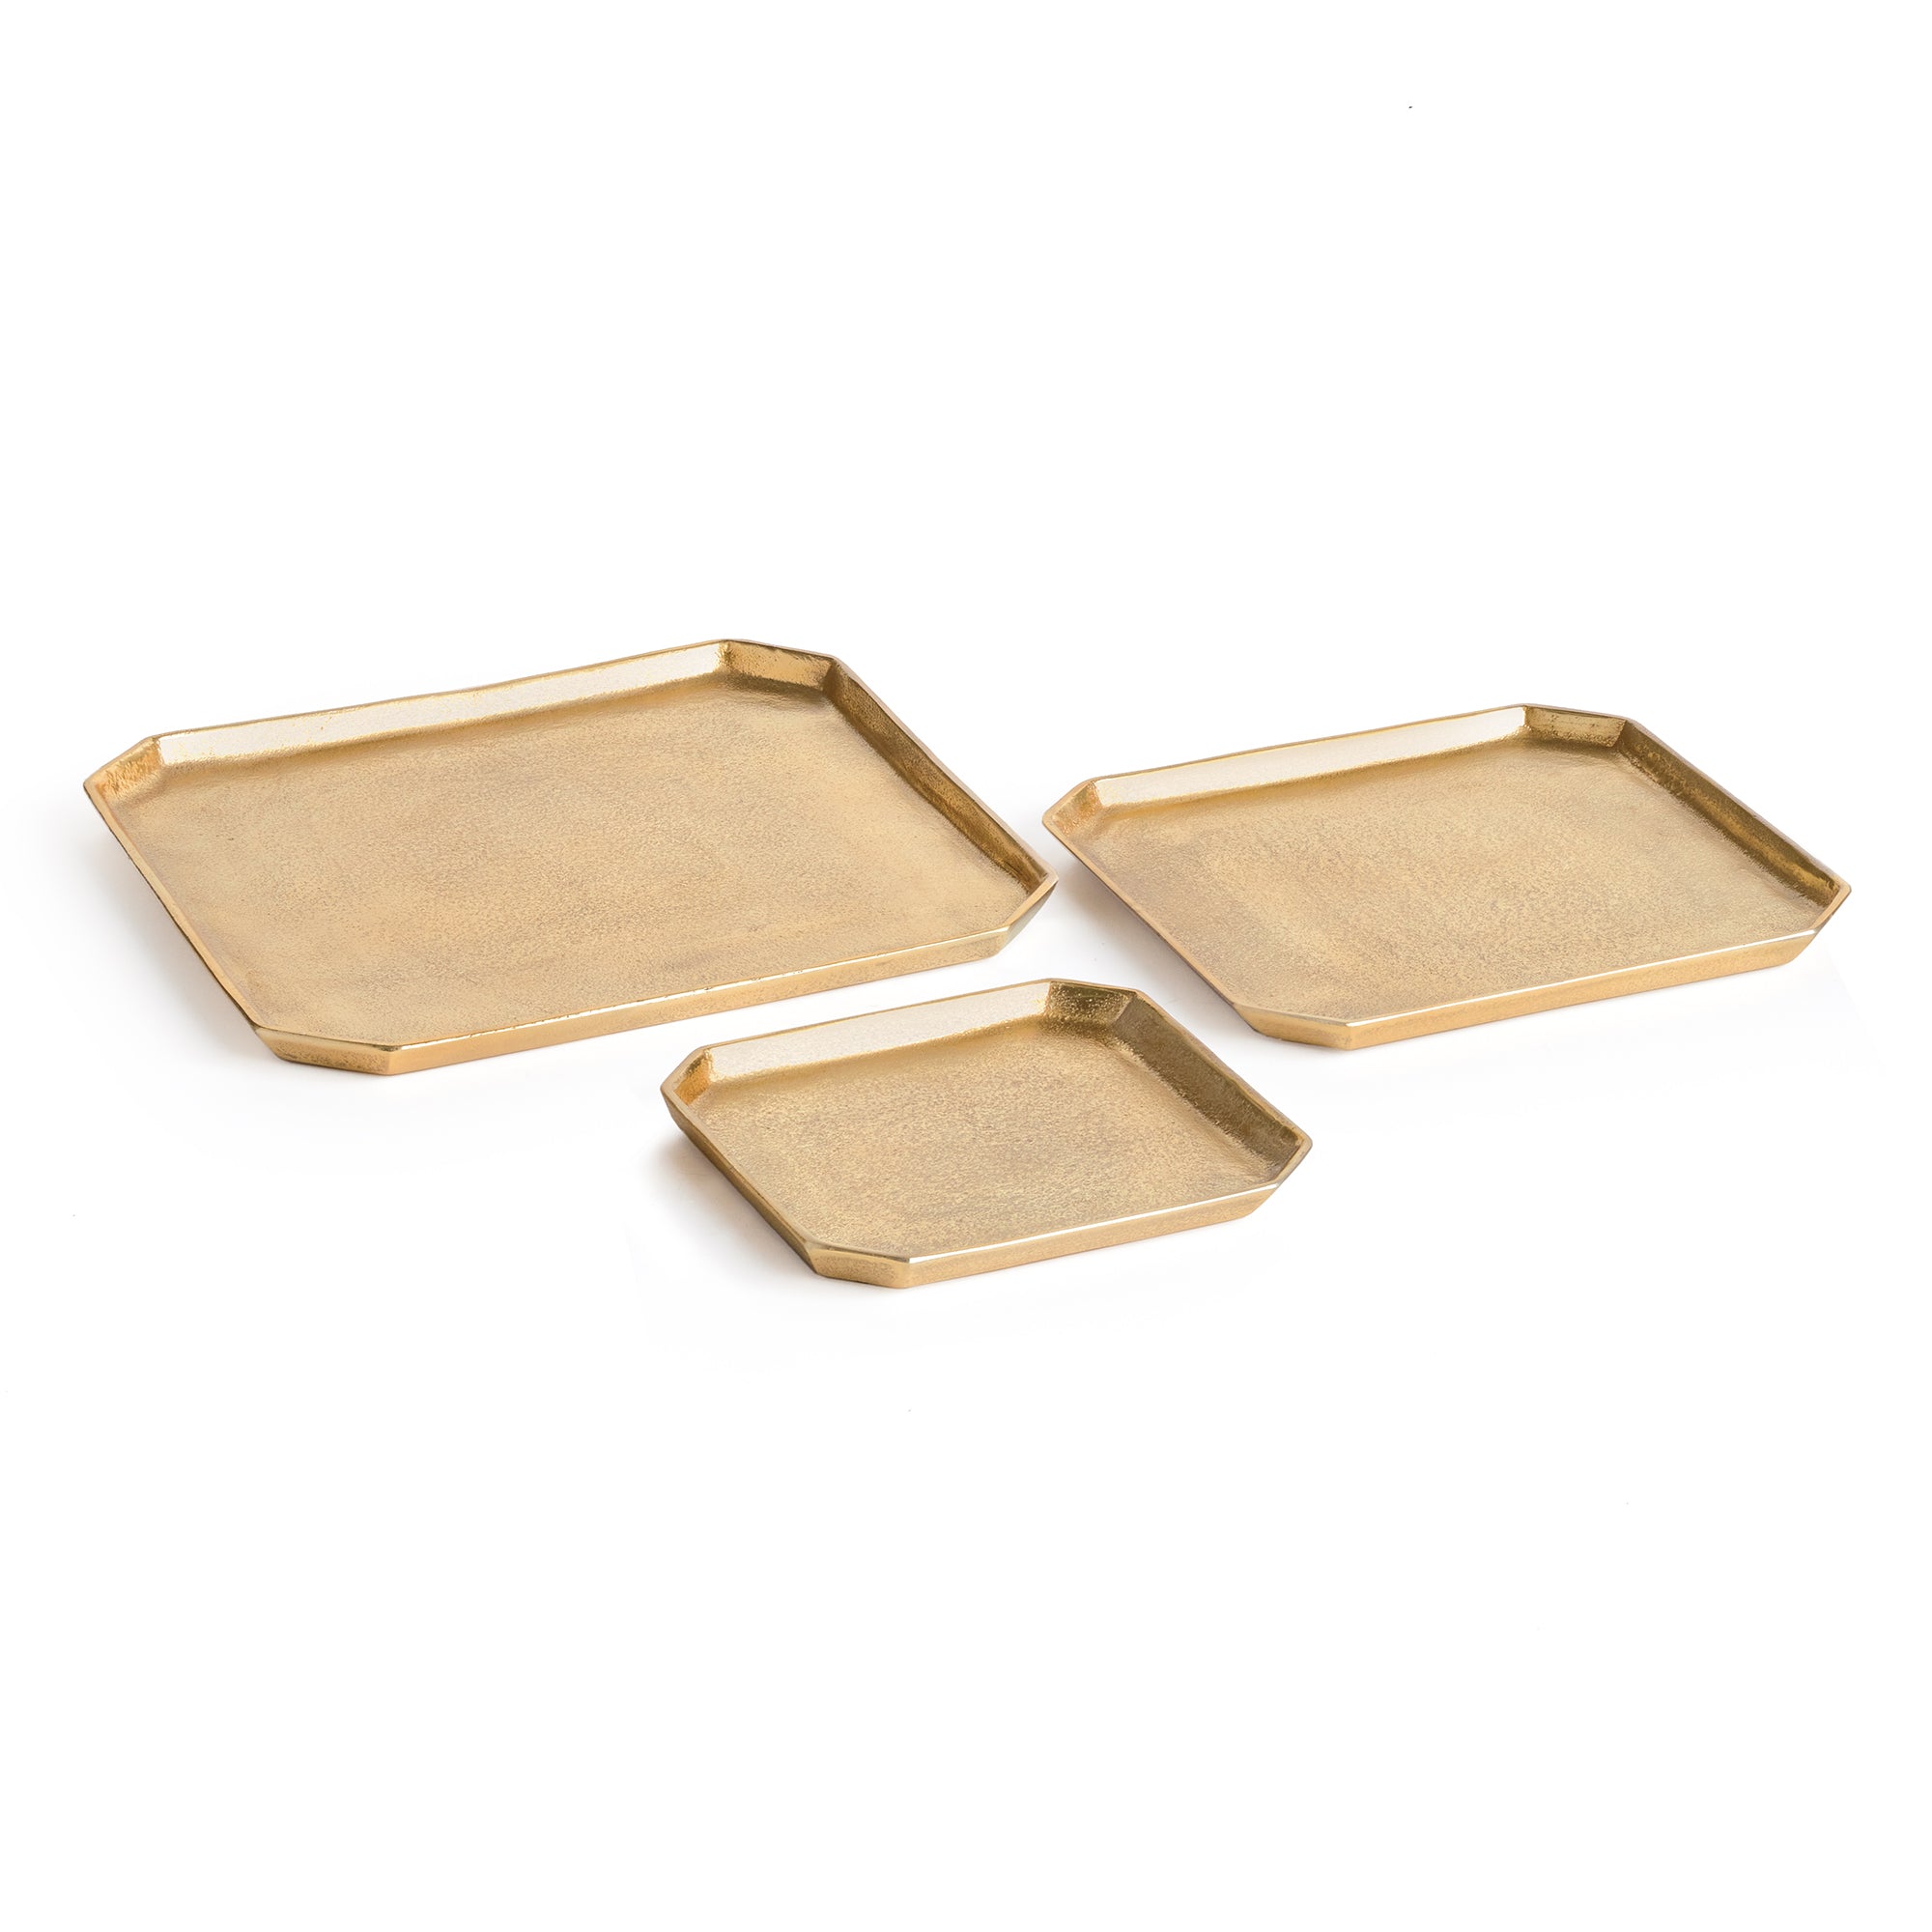 A geometric shape and sleek look make these cast aluminum trays unique. Line with a collection of candles for a golden, contemporary touch. They are dry food safe, so serve your favorite muffins or rolls in style at your next gathering. Amethyst Home provides interior design, new construction, custom furniture, and area rugs in the Salt Lake City metro area.